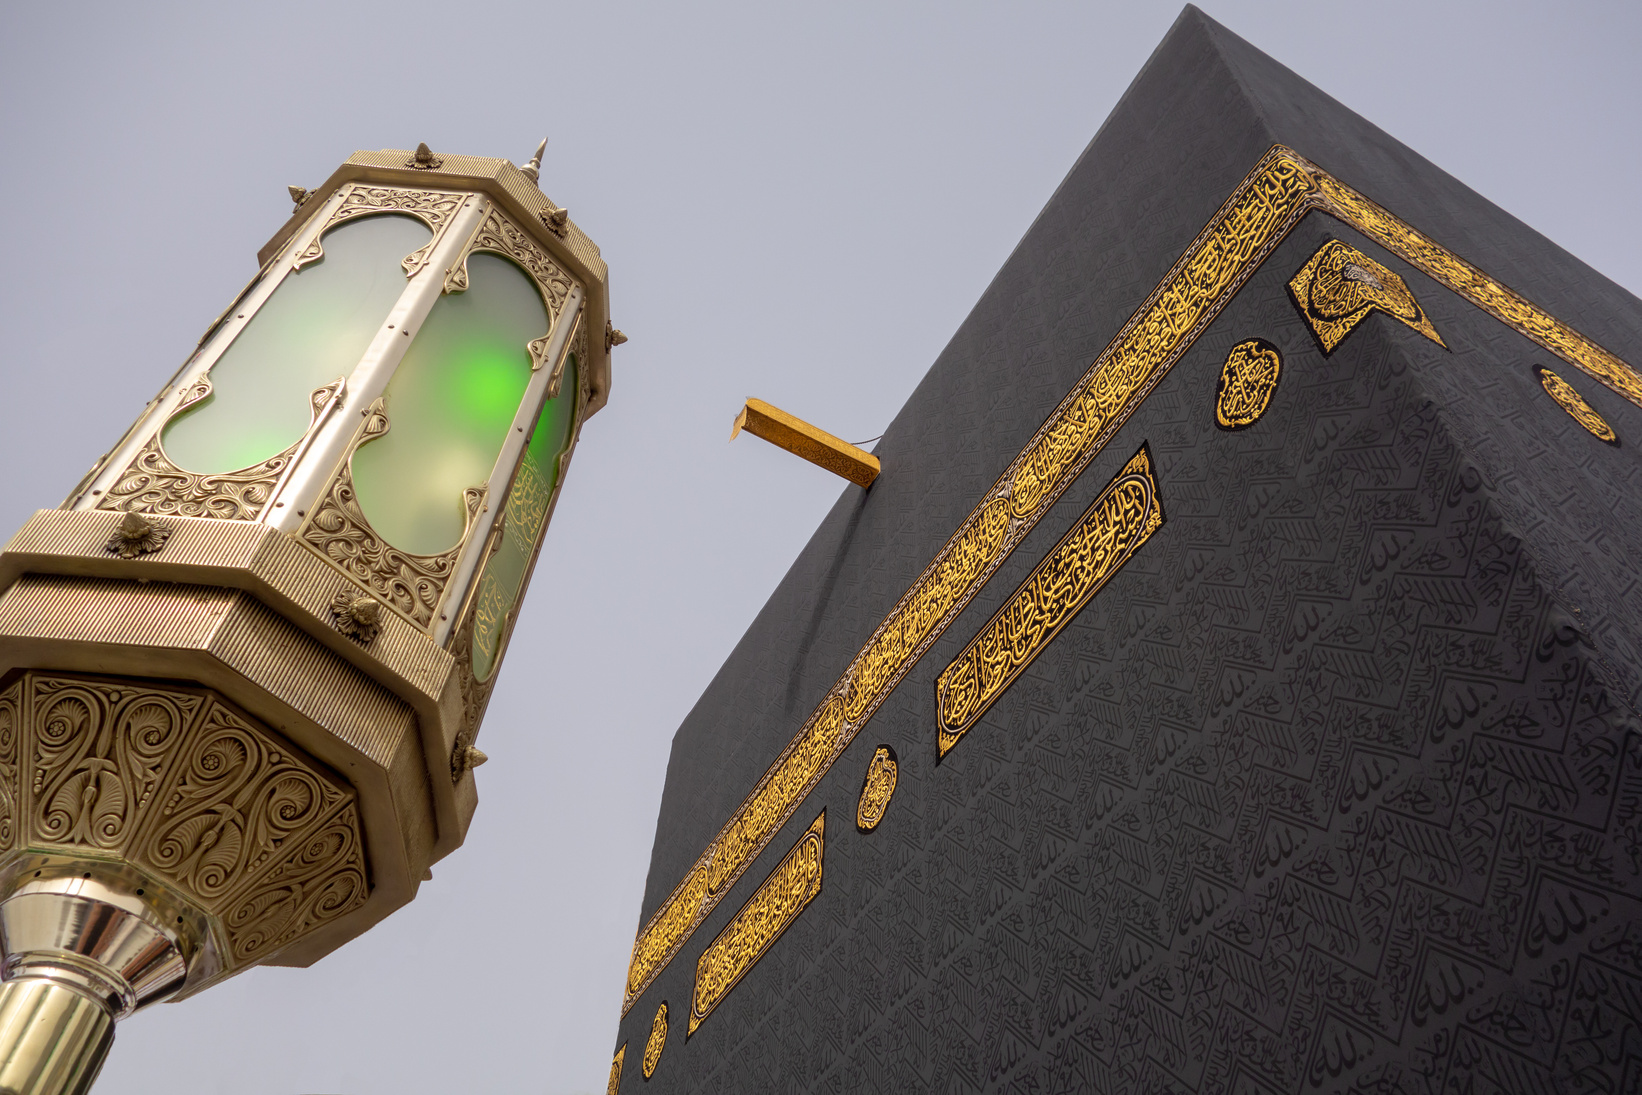 Close up of Kaaba with one of the lights.